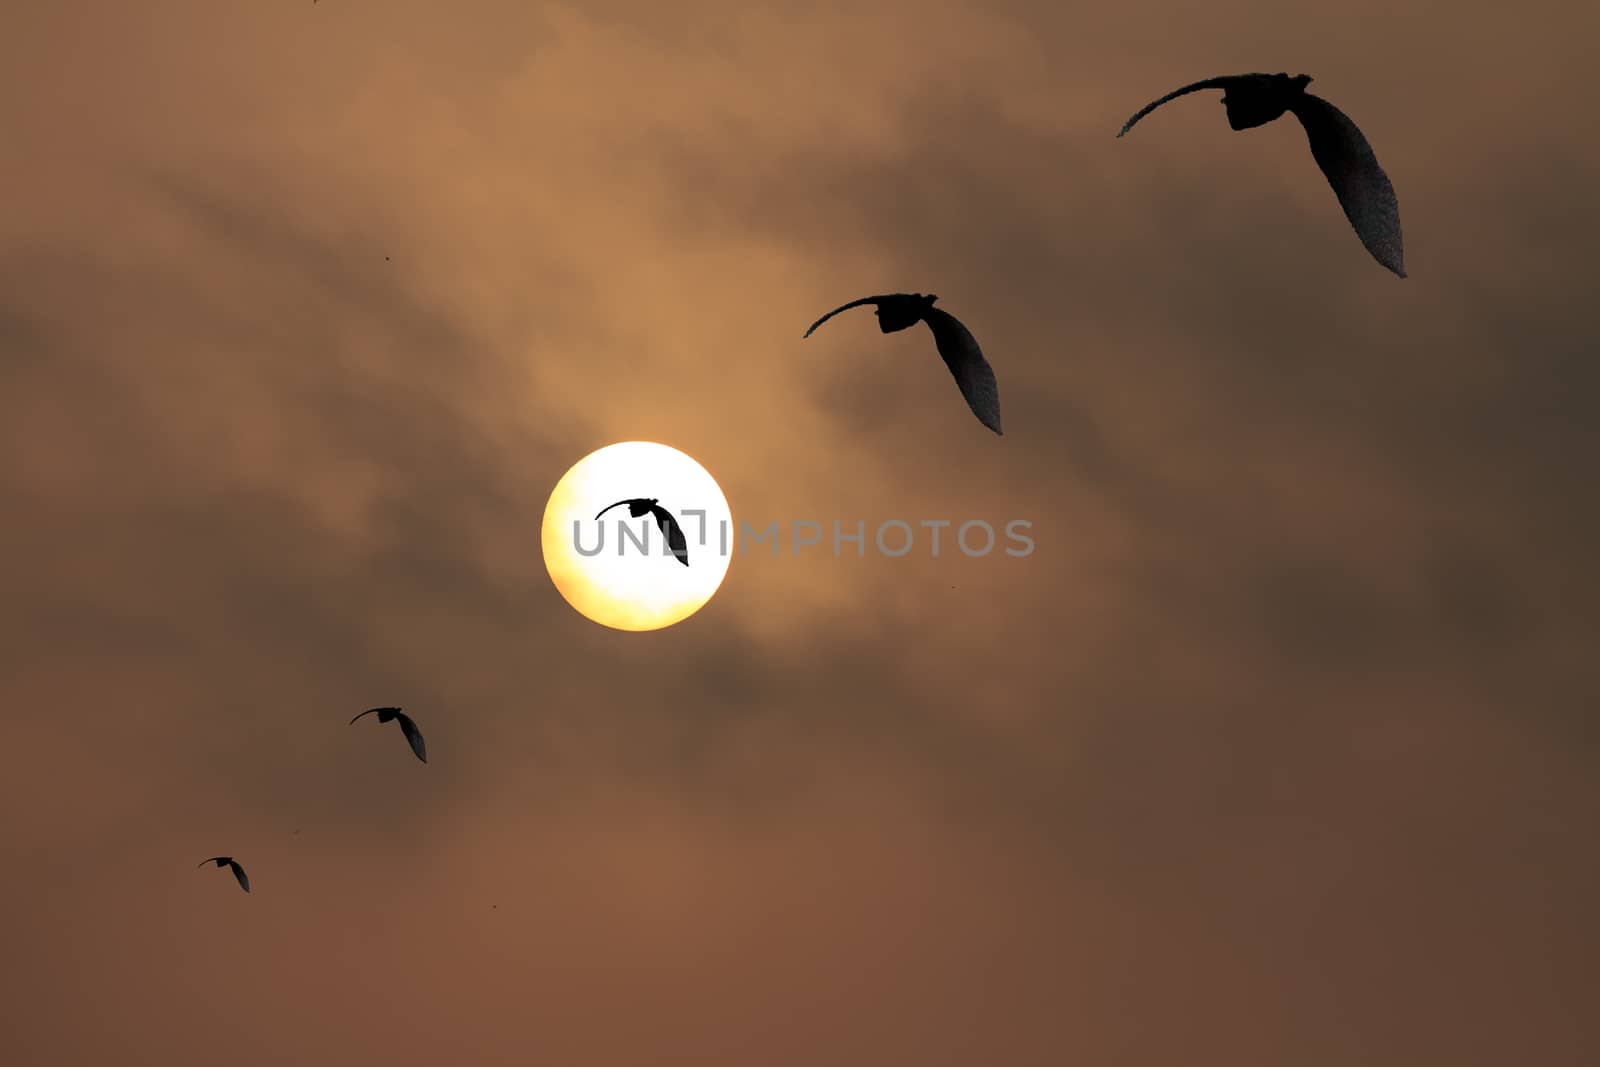 Five Birds flying in a diagonal Single line formation against the dawn sun on a hot dusty polluted morning make for an eerie yet hauntingly beautiful dawn picture.